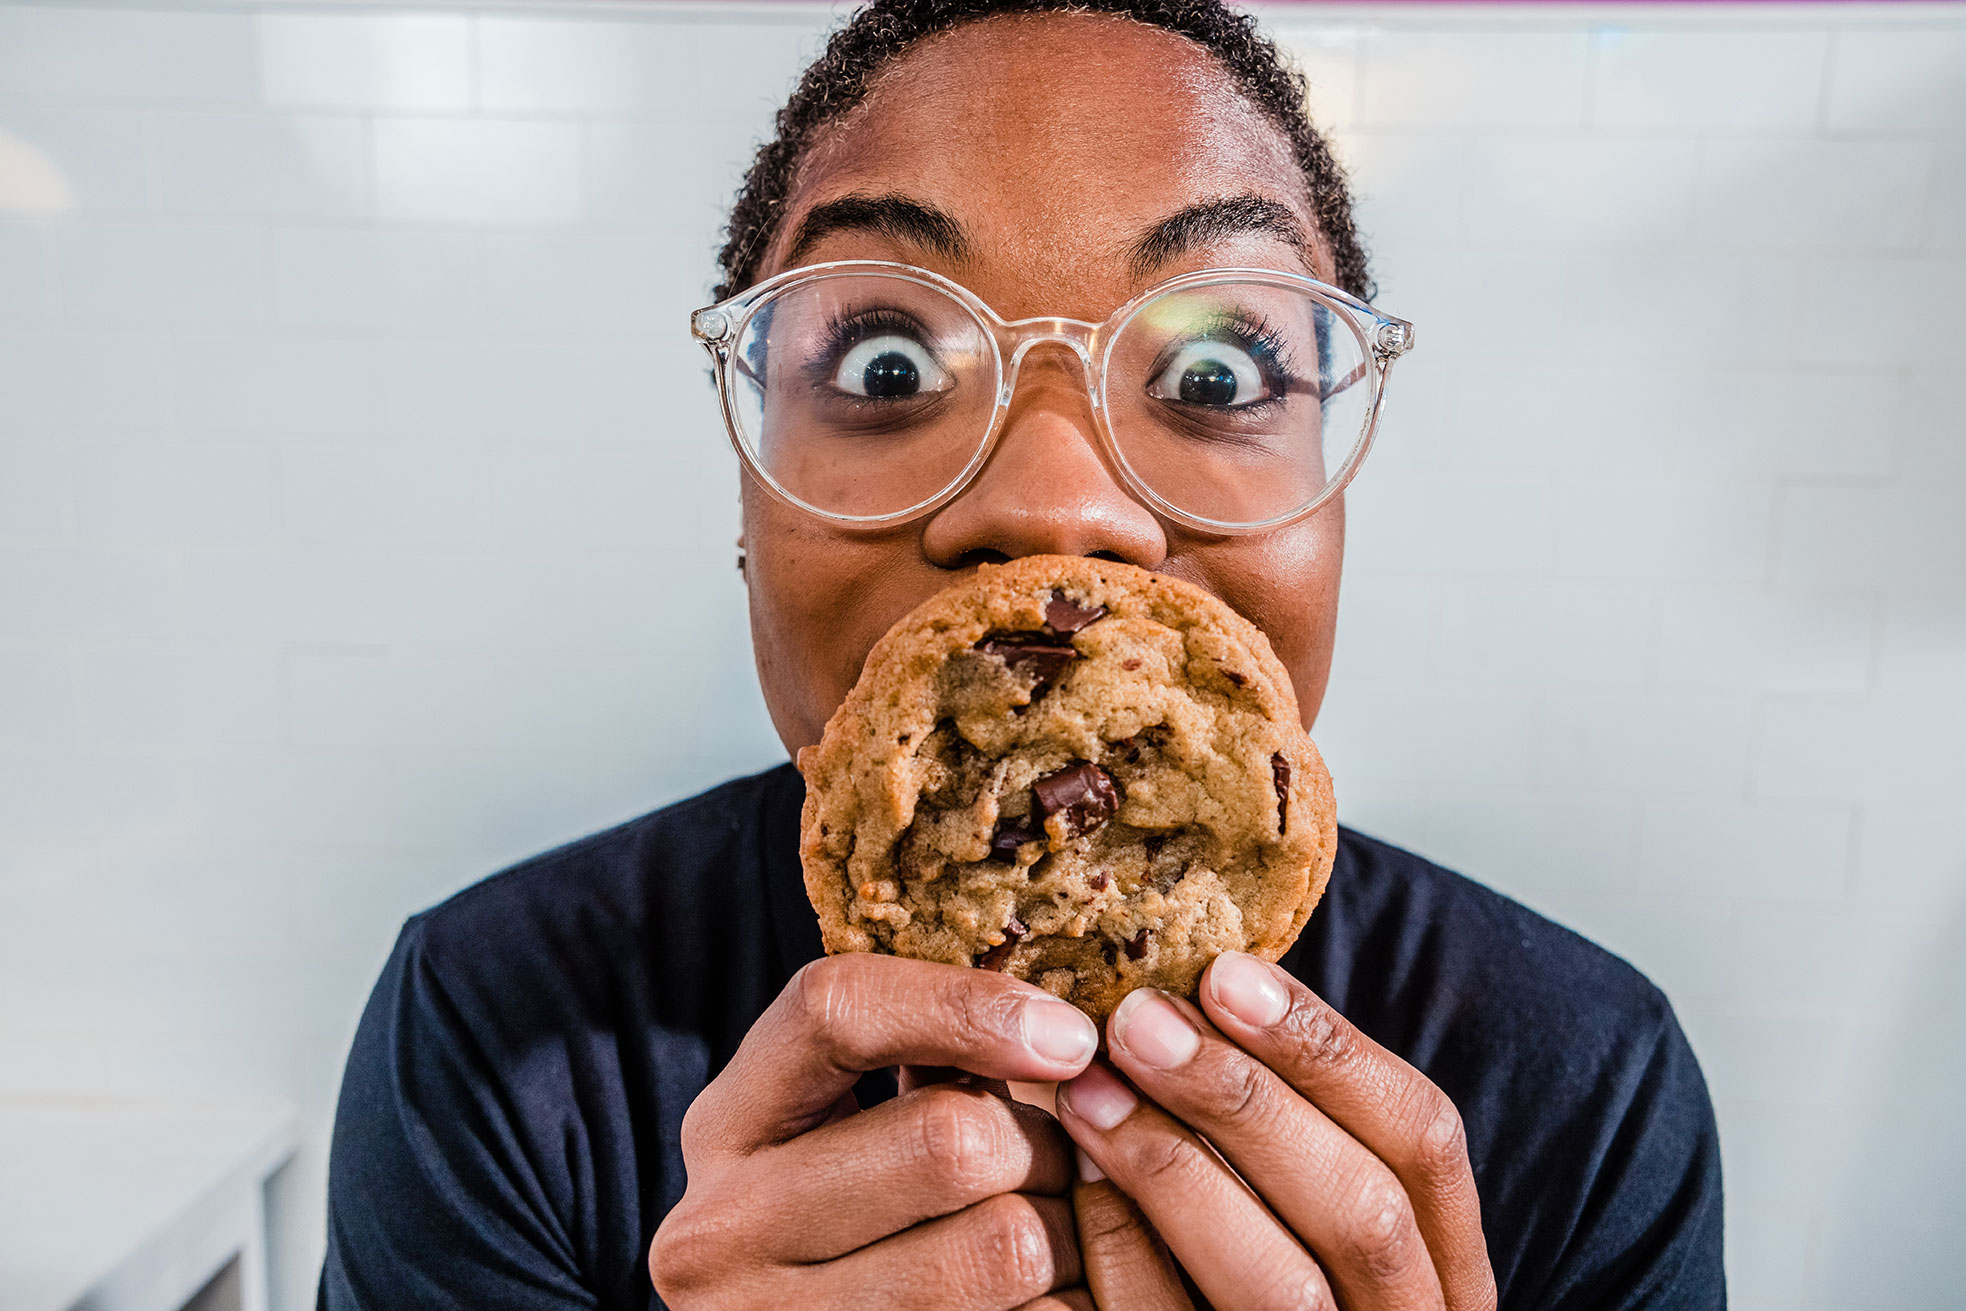 Person with glasses smiling behind a cookie